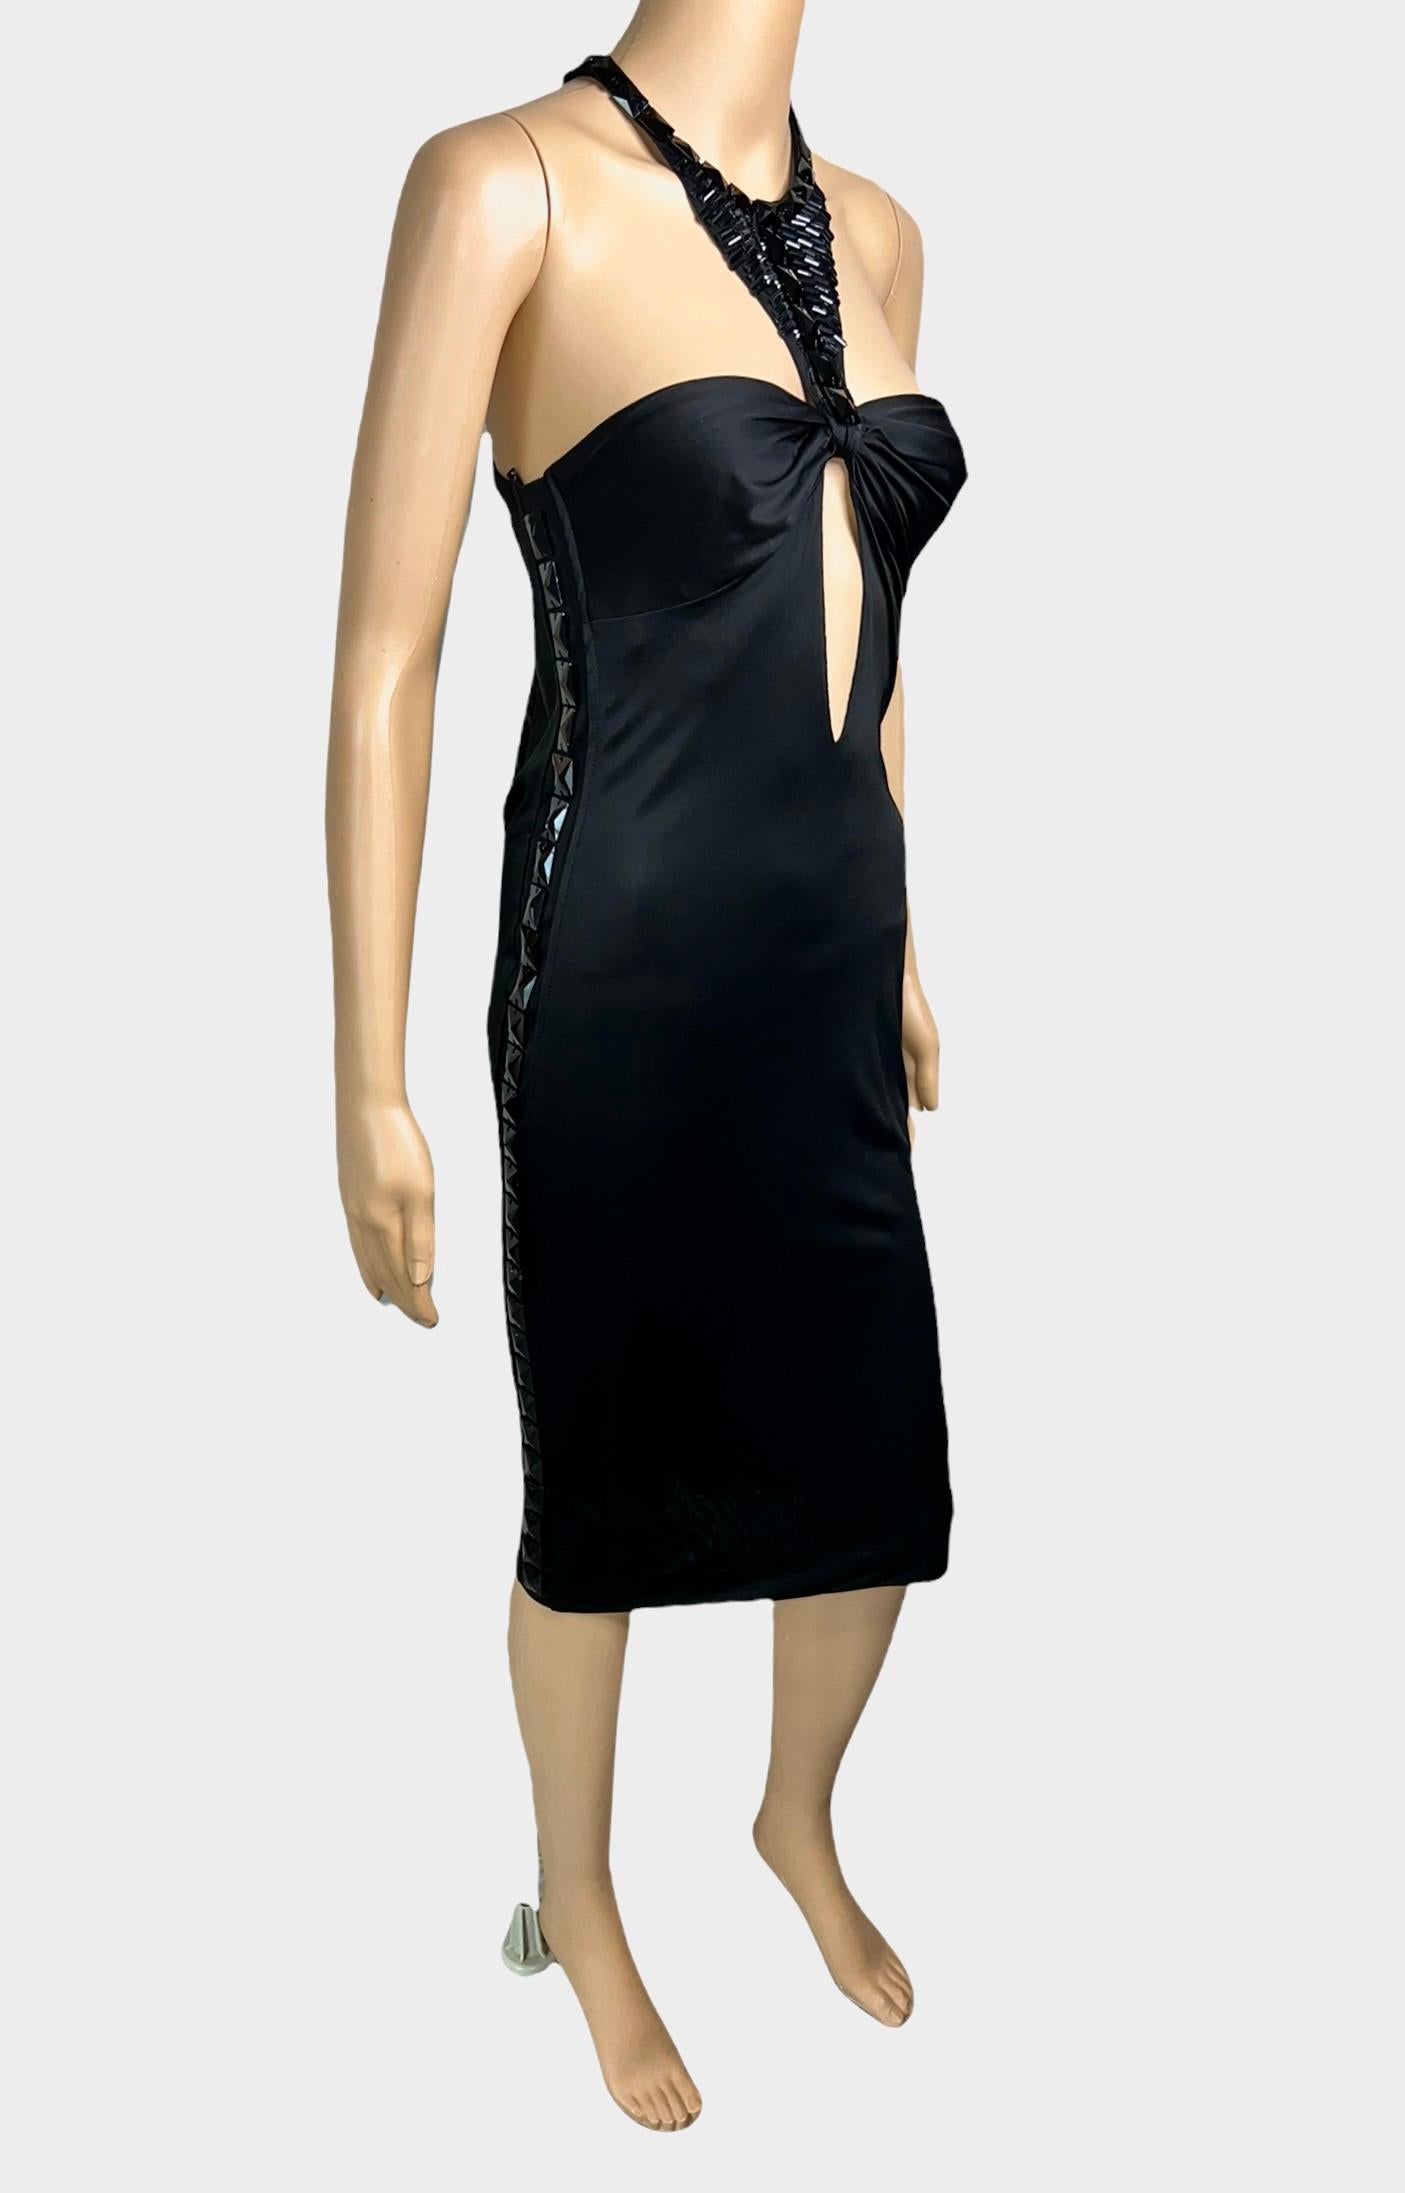 Women's Tom Ford for Gucci F/W 2004 Embellished Plunging Cutout Black Evening Dress  For Sale